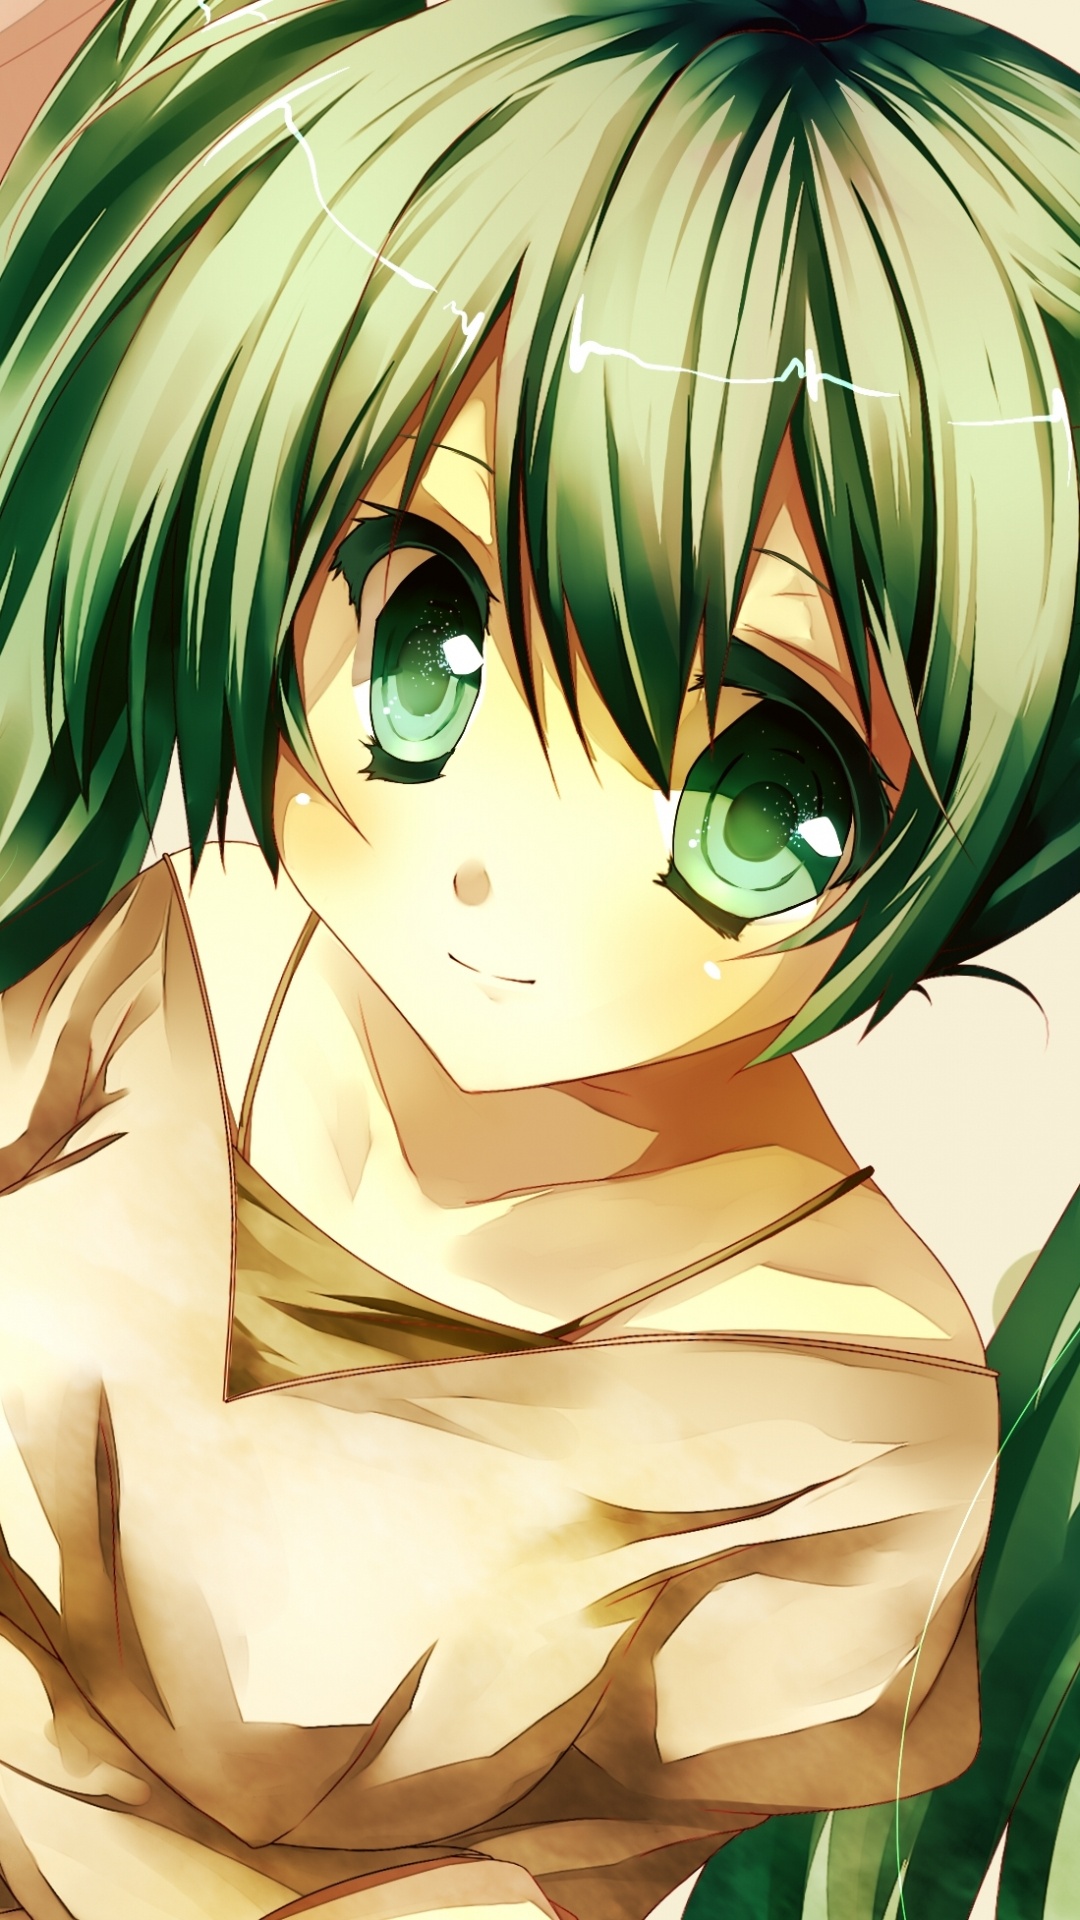 Personnage D'anime Masculin Aux Cheveux Verts. Wallpaper in 1080x1920 Resolution